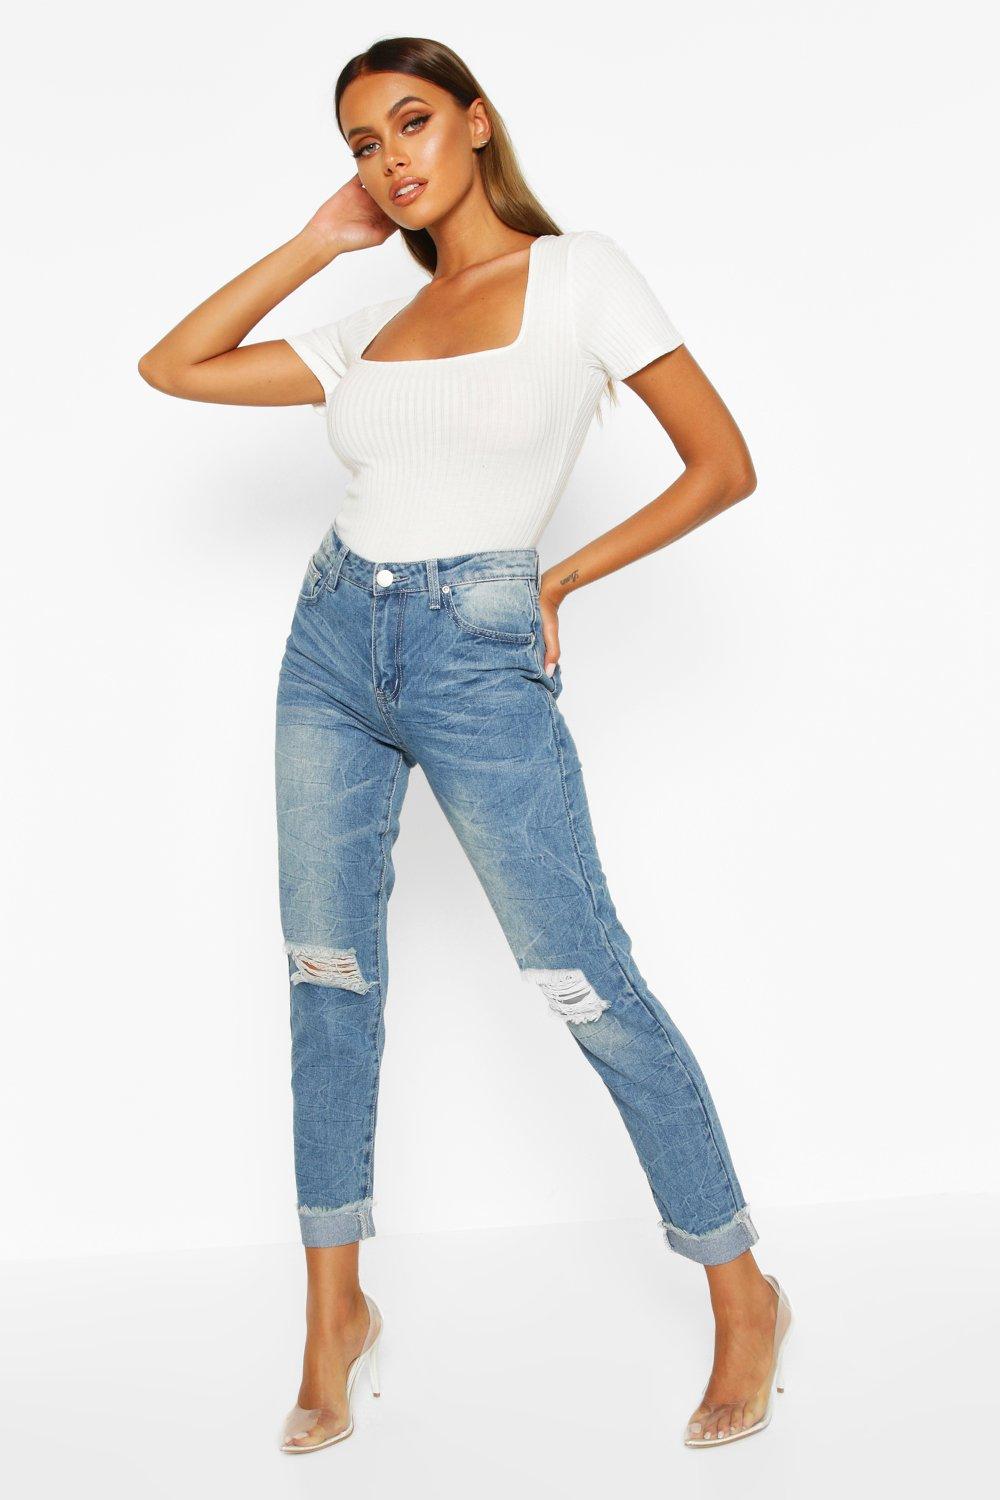 This is how to wear boyfriend jeans the right way!